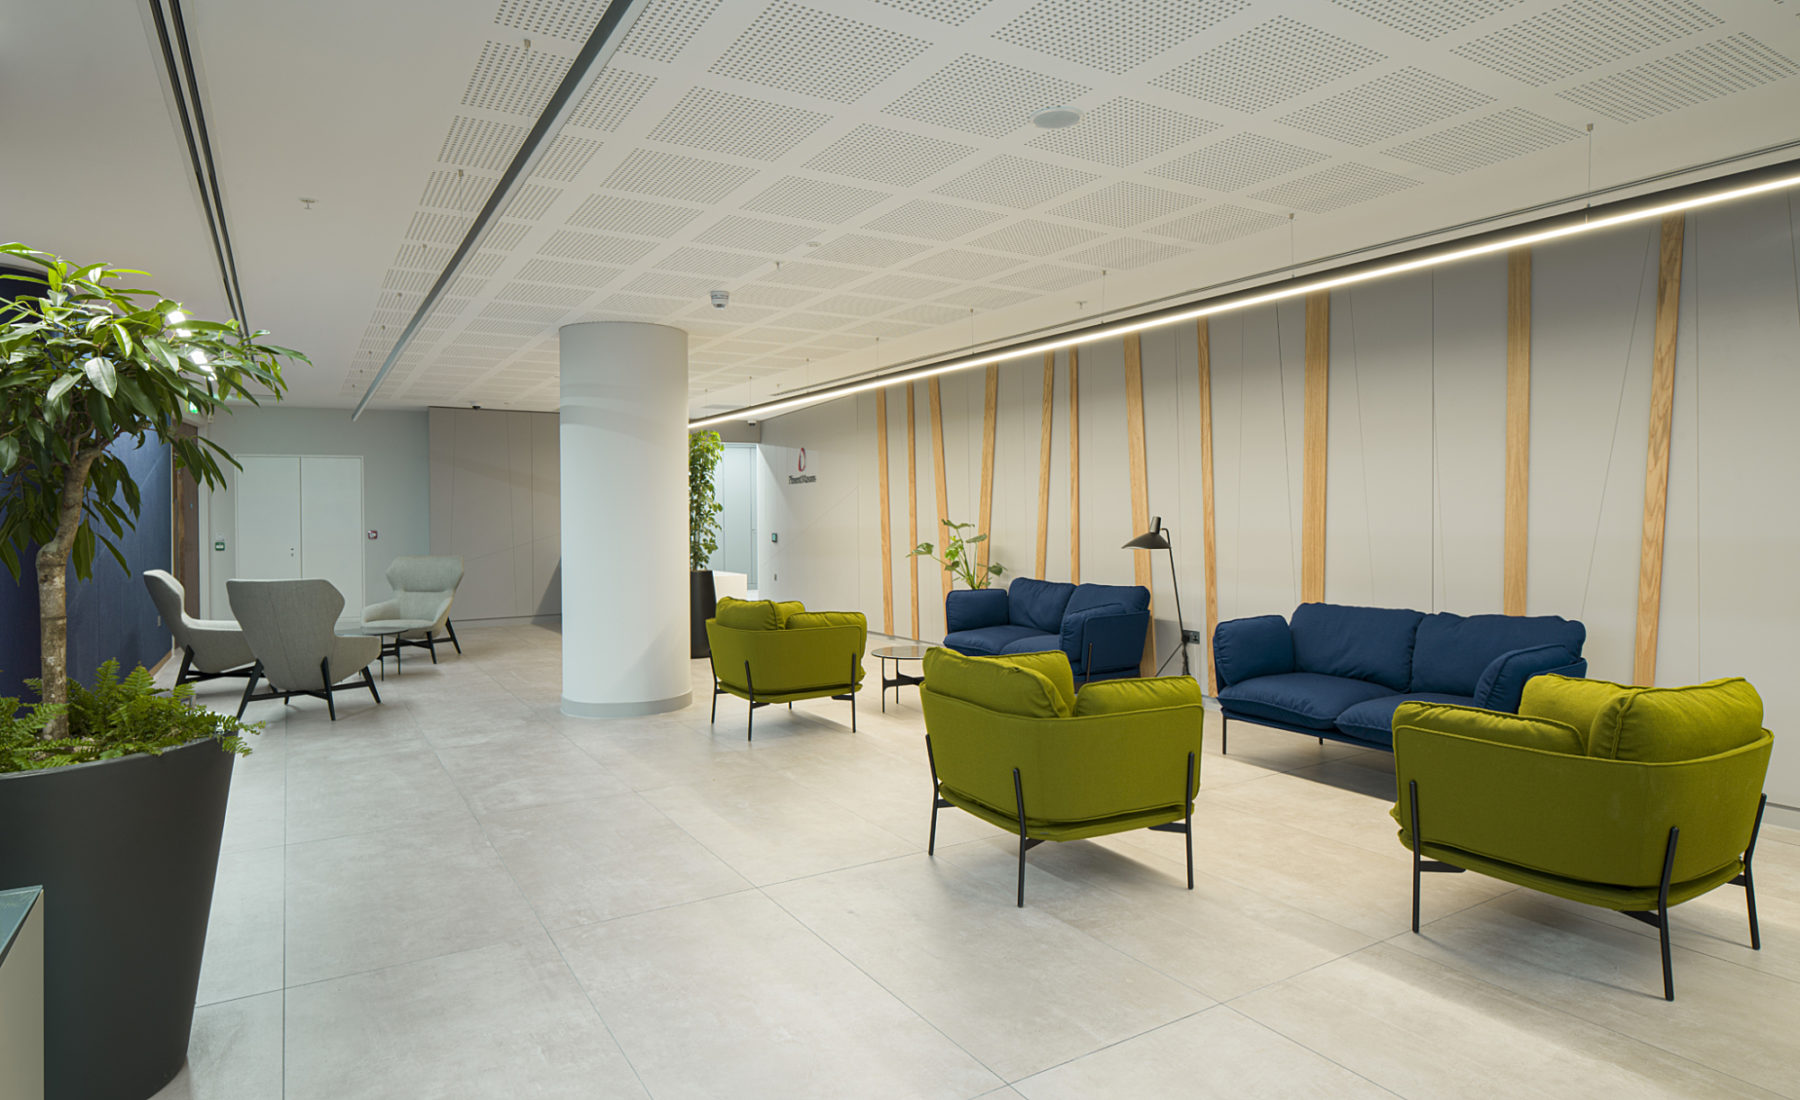 Pinsent Masons innovative office fit out focussed on wellbeing